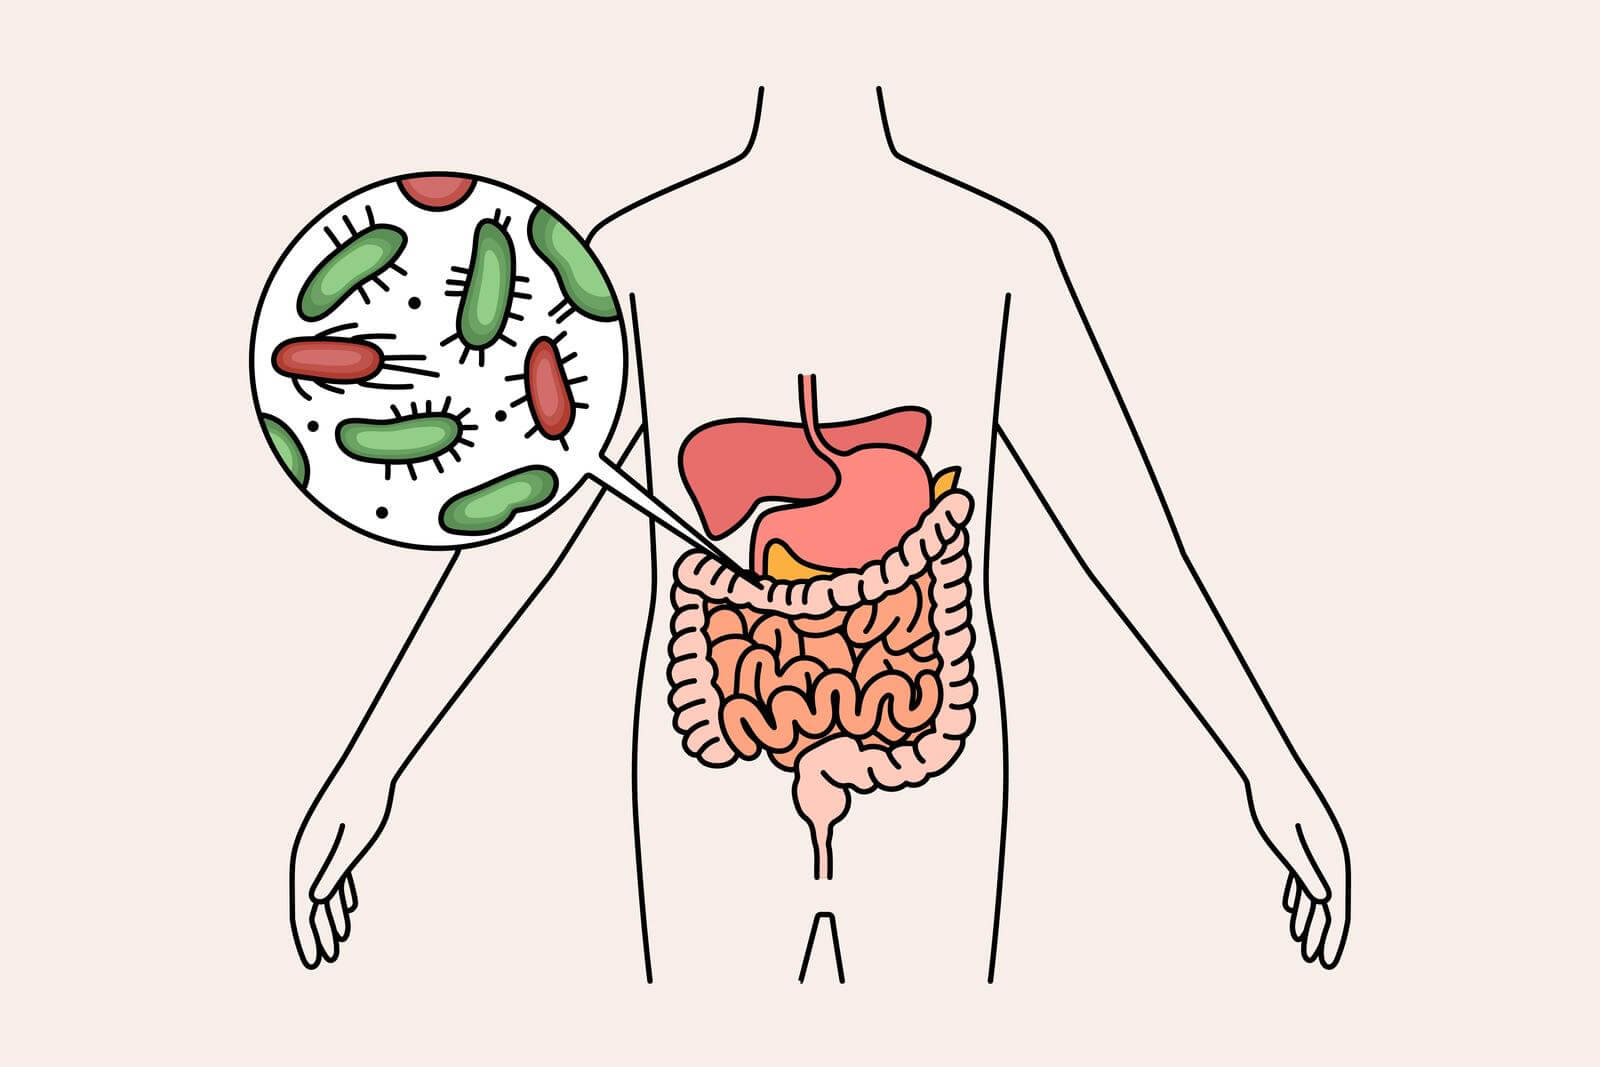 Digestive system and intestines concept. Human body with green and red bacterias microorganisms in stomach and intestines.